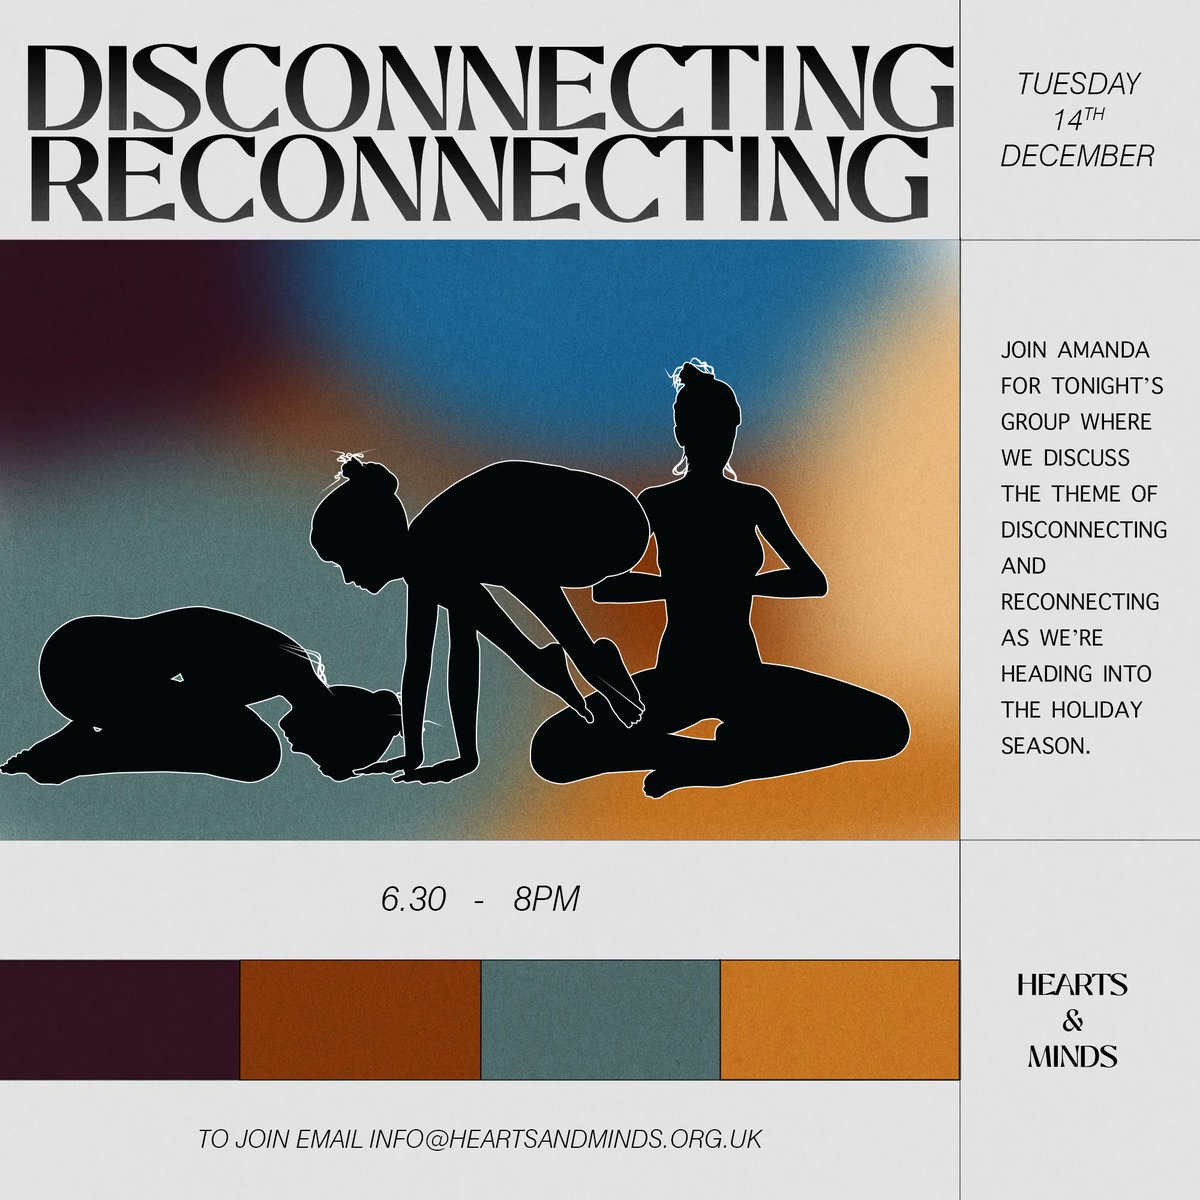 tonight, 6.30-8pm! join amanda for our group tonight where we discuss the theme of disconnecting and reconnecting, especially as we head into the holiday season. 💞♻️♾👥🌜🌛